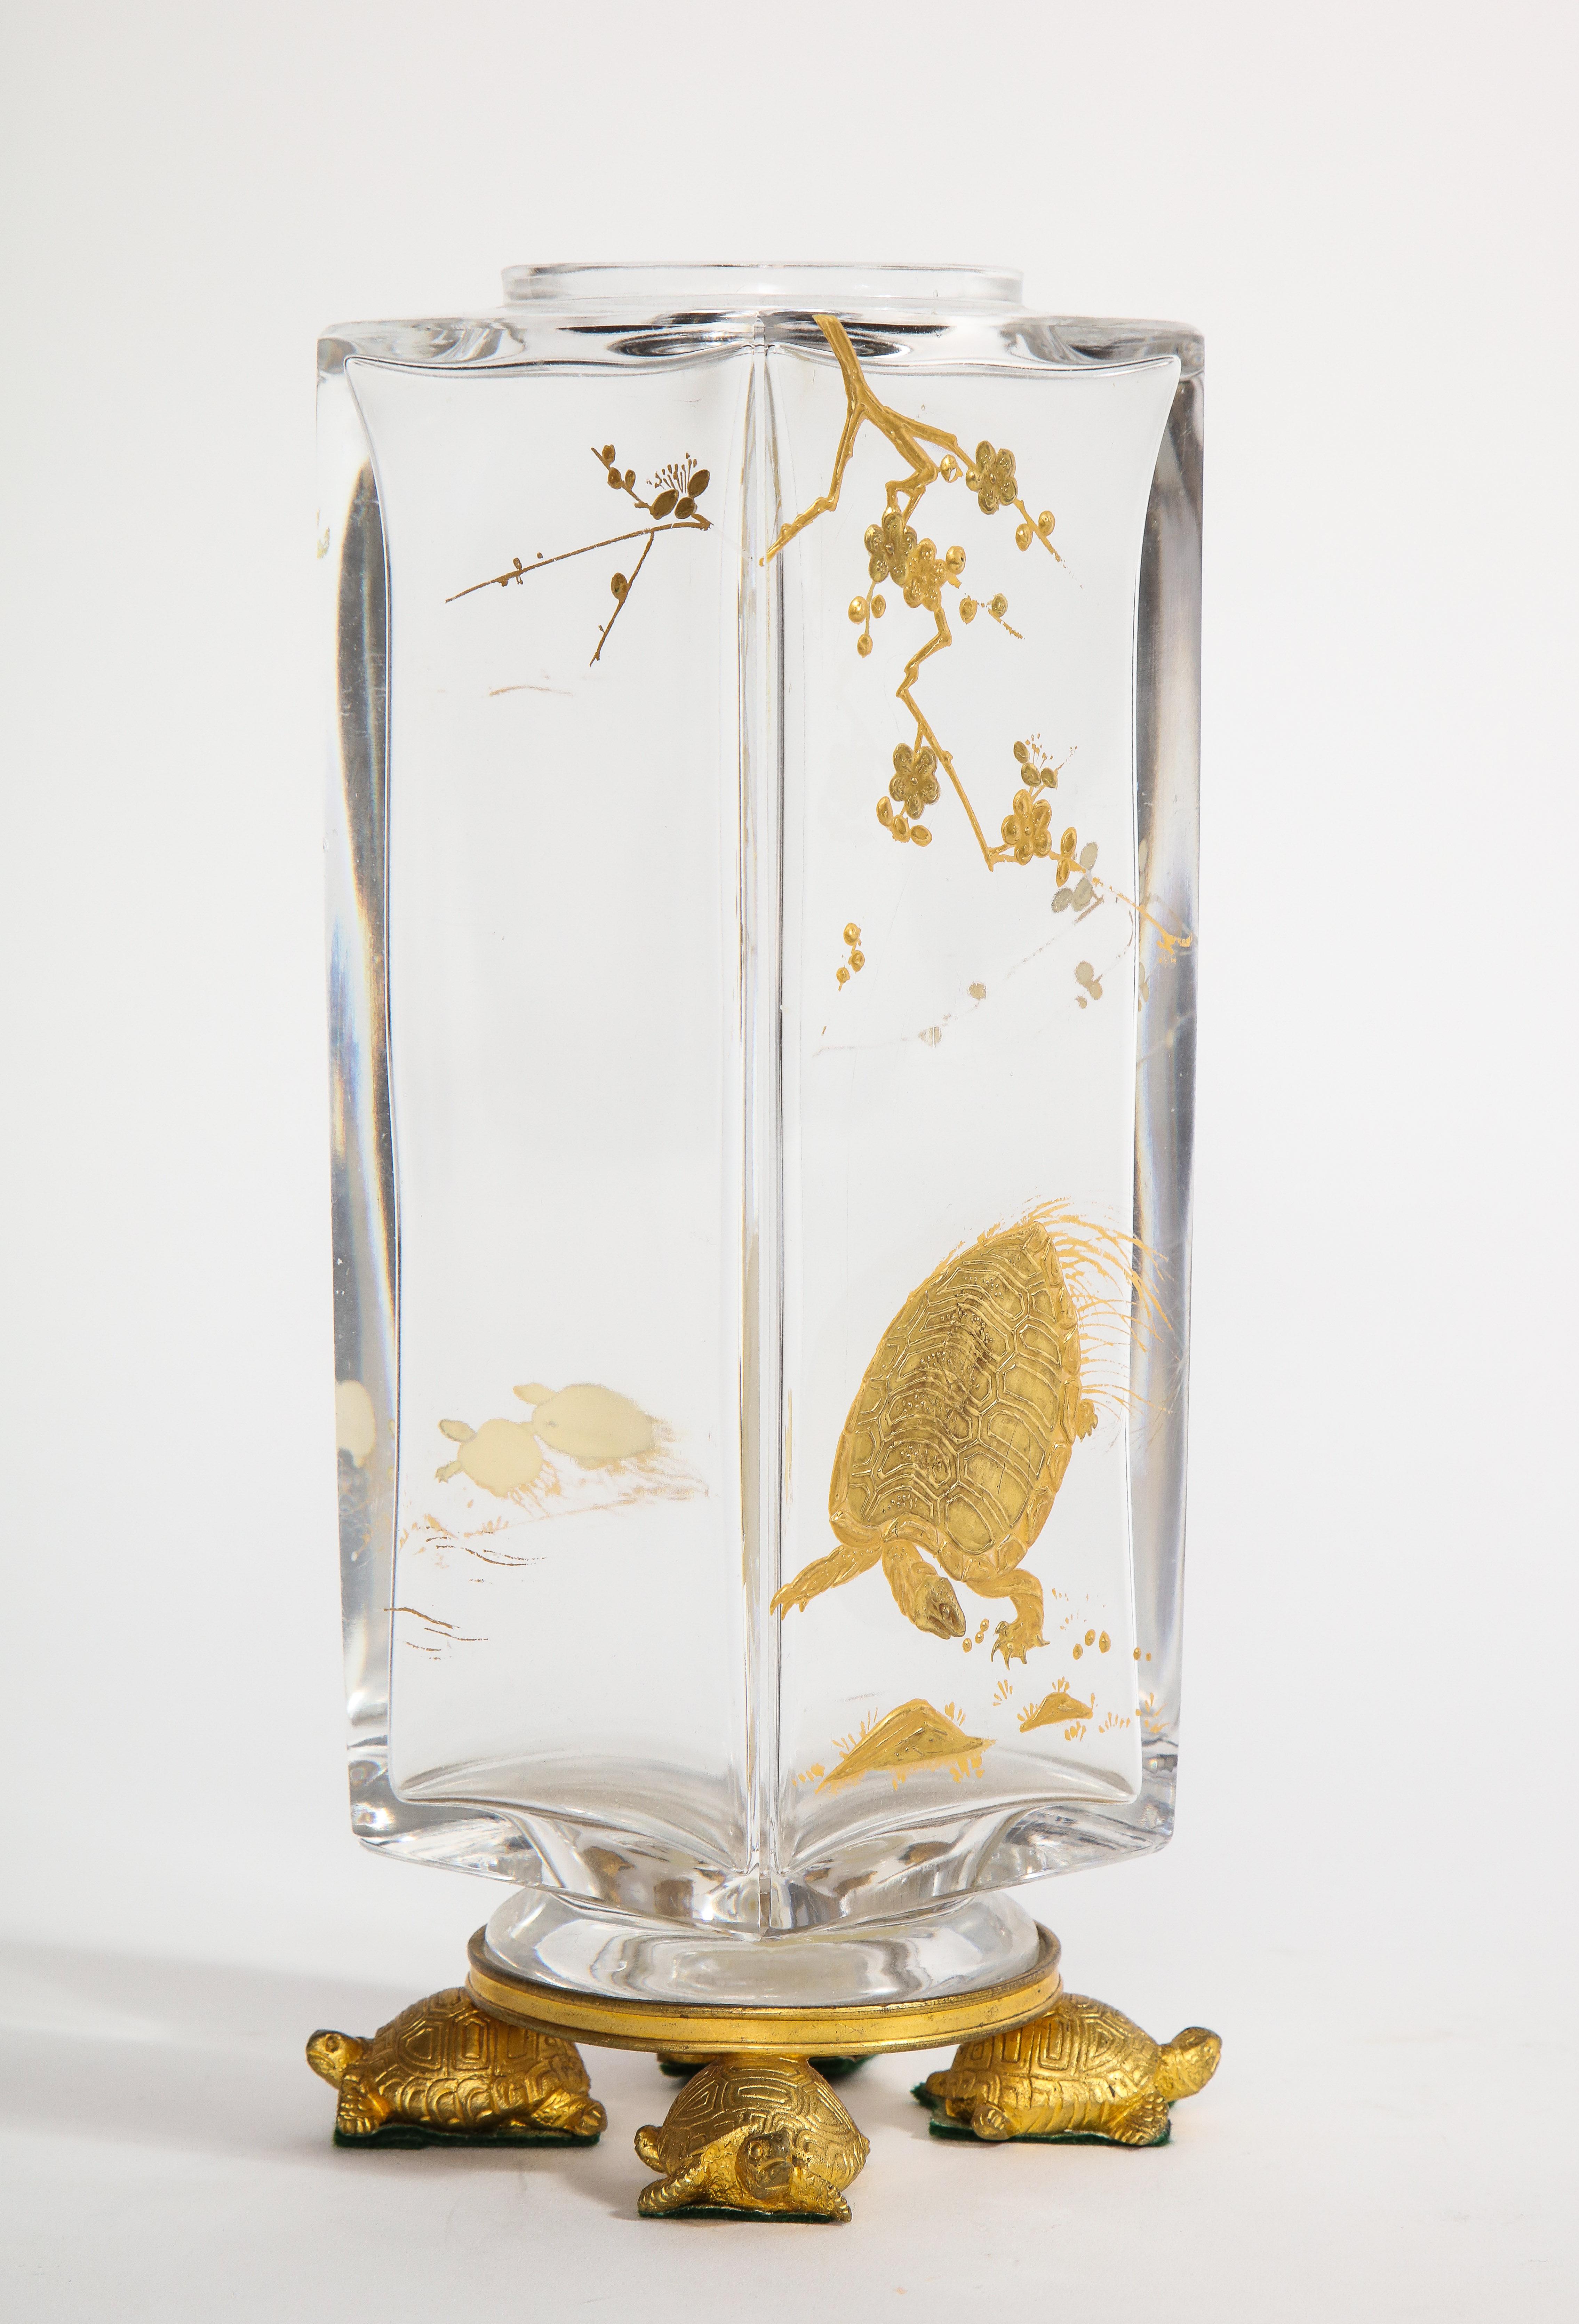 A Gorgeous and extremely rare French Japonisme ormolu-mounted turtle footed Baccarat crystal vase designed with a gilt turtle design, Baccarat stamp on bottom. The quality and craftsmanship of this piece is second to none. Baccarat crystal is known